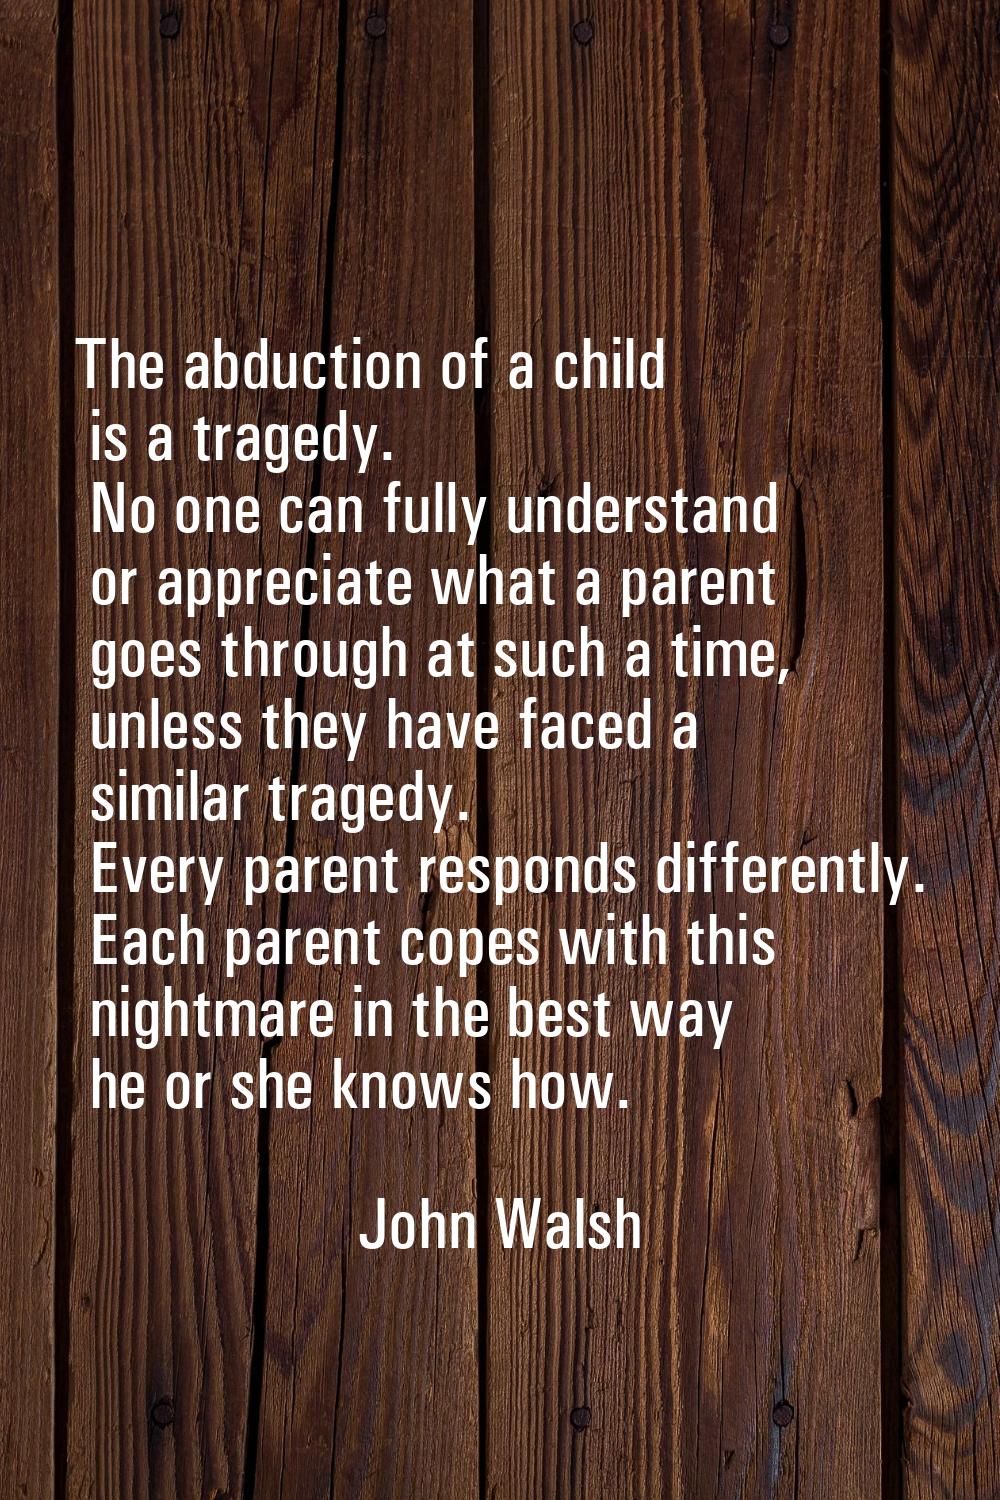 The abduction of a child is a tragedy. No one can fully understand or appreciate what a parent goes